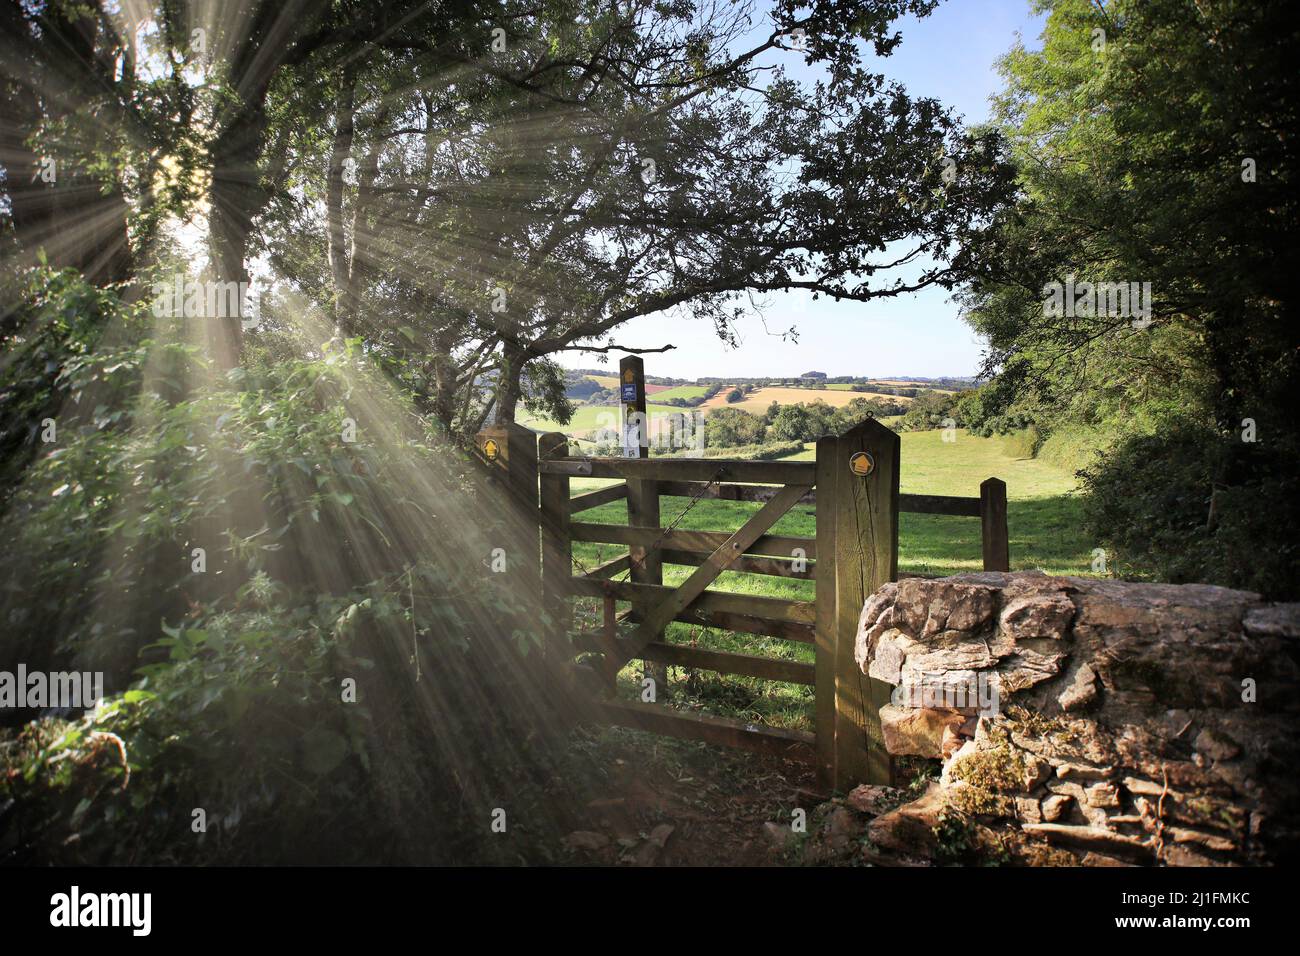 Gates to part of a  public footpath that run's from Torbay to Totnes in the South Hams area of South Devon,Southwest England. Stock Photo